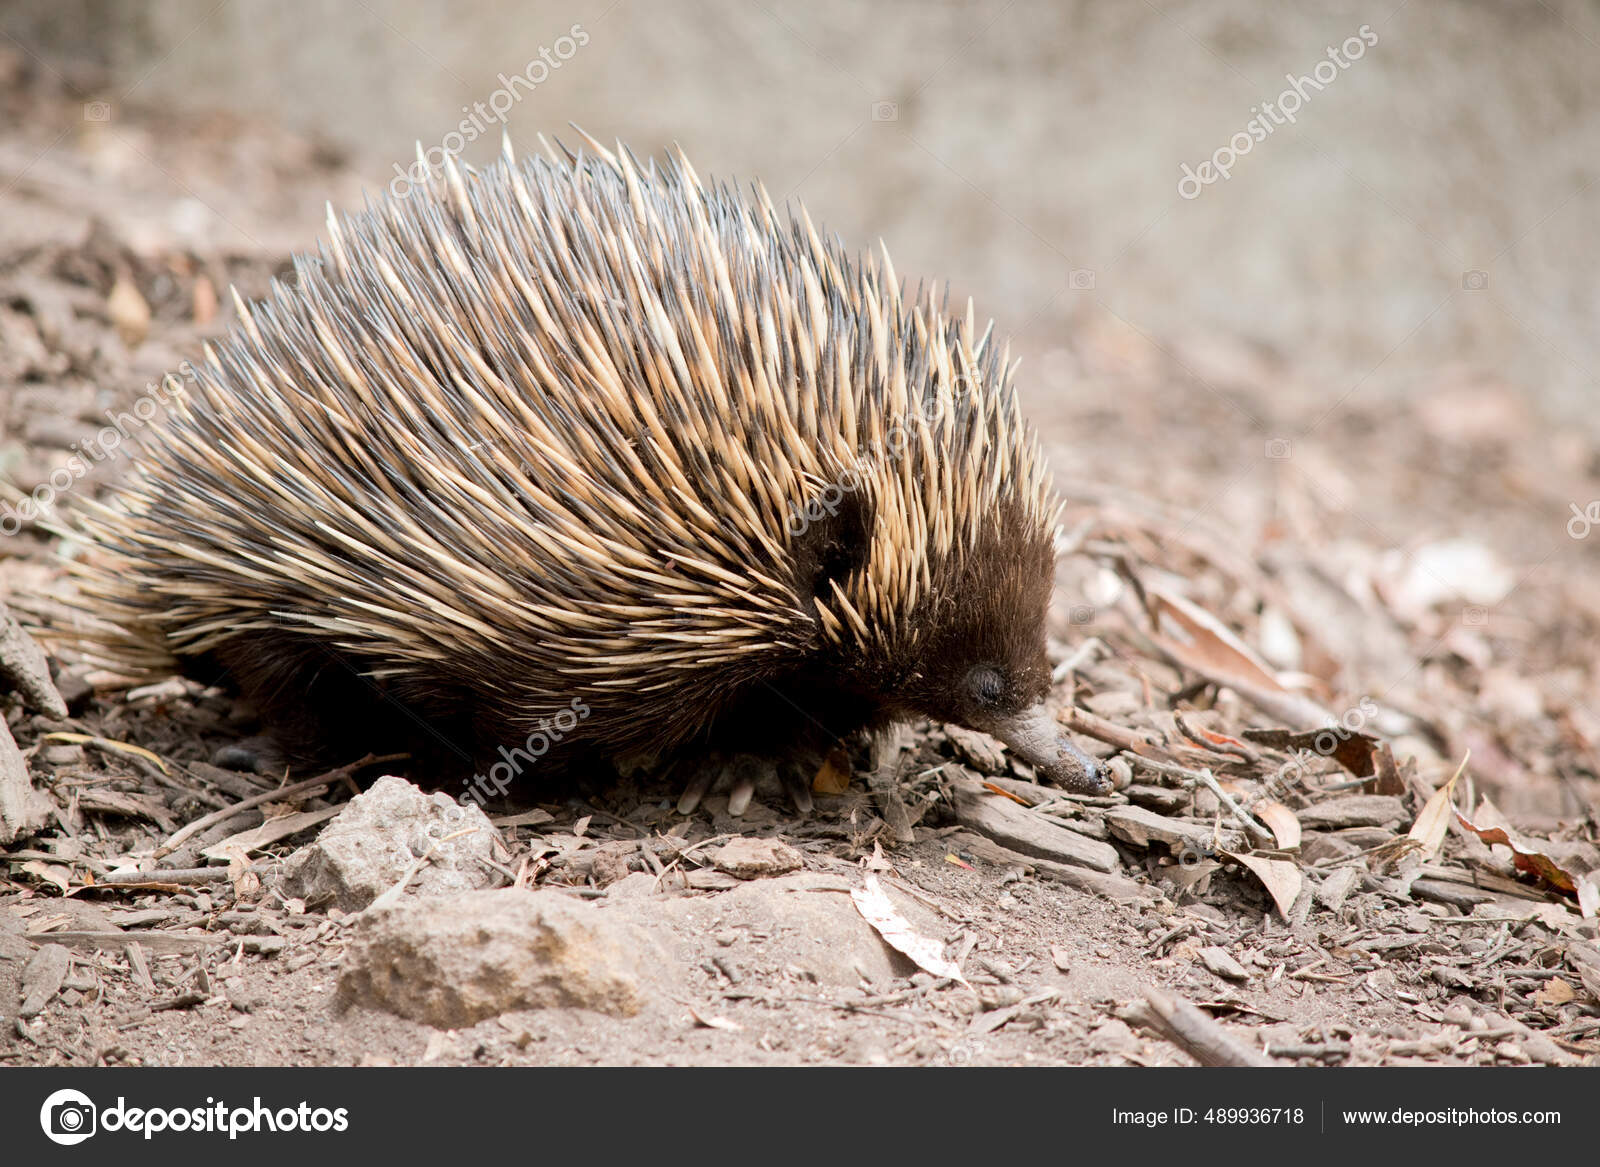 Echidna Brown Marsupial Prickly Spines Potection Stock Photo by ...